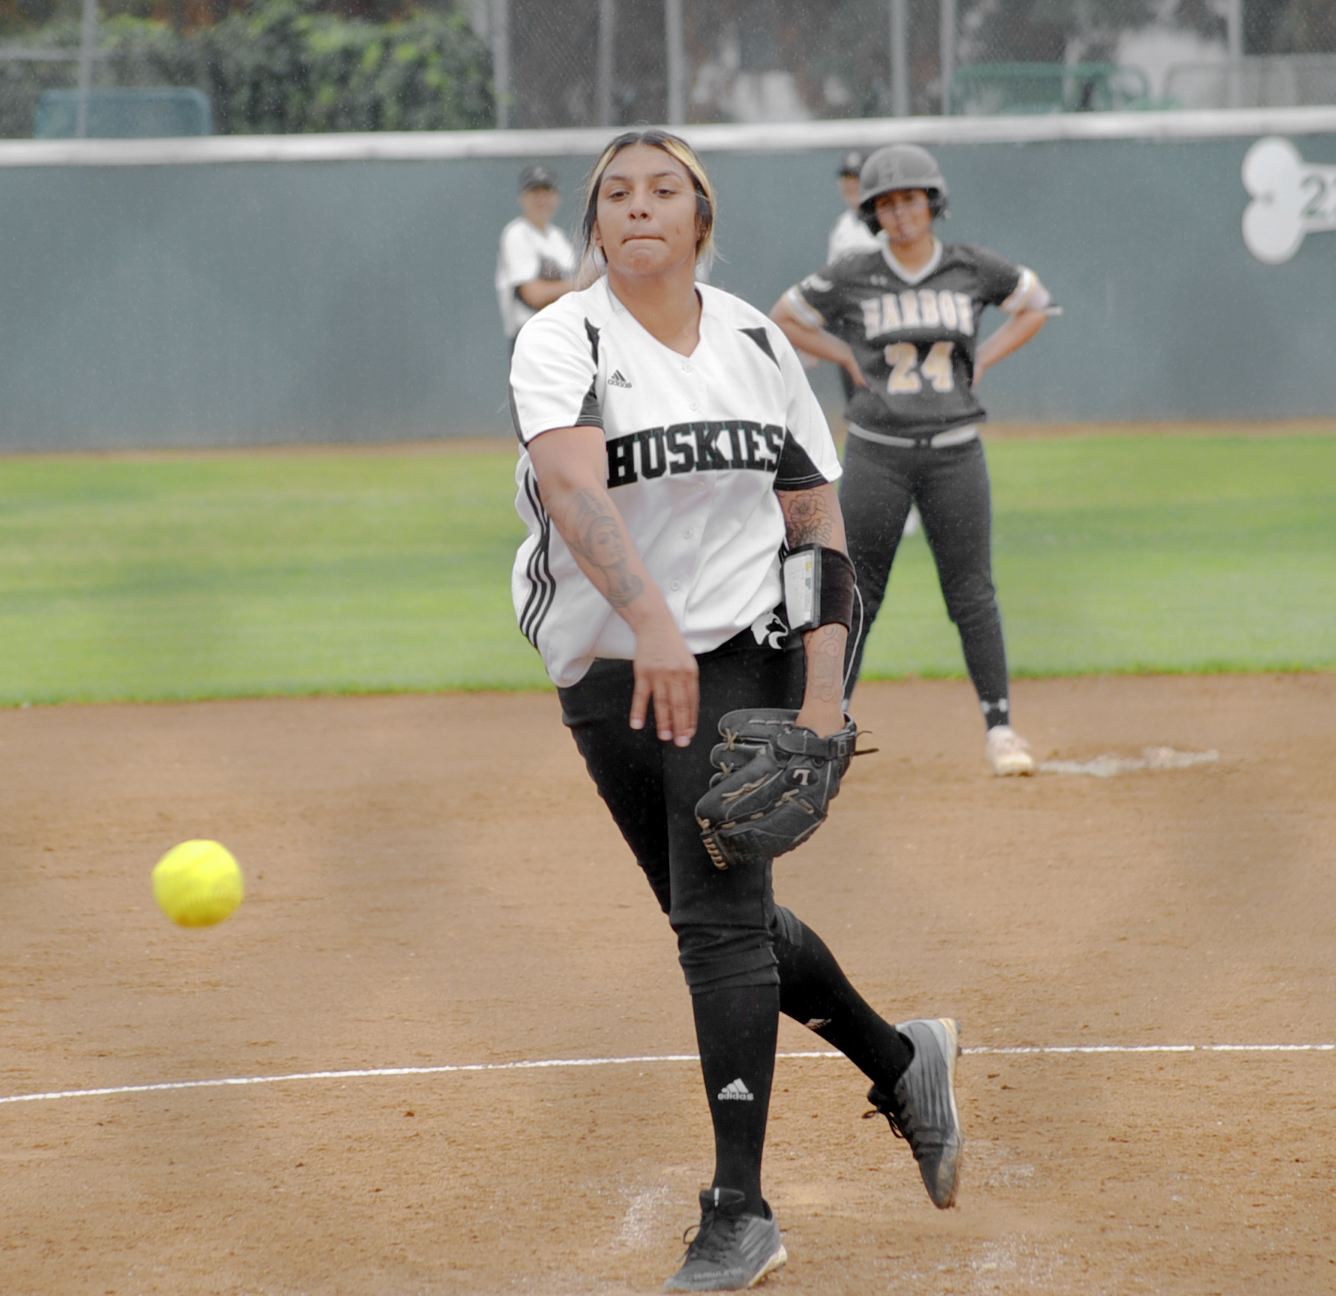 East Los Angeles College (20-15, 5-5) freshman pitcher Angelita Villalvazo, pictured in a previous win, earned the W in the Huskies 6-4 upset over Chaffey College (24-13, 6-5). (Photo by Tadzio Garcia)